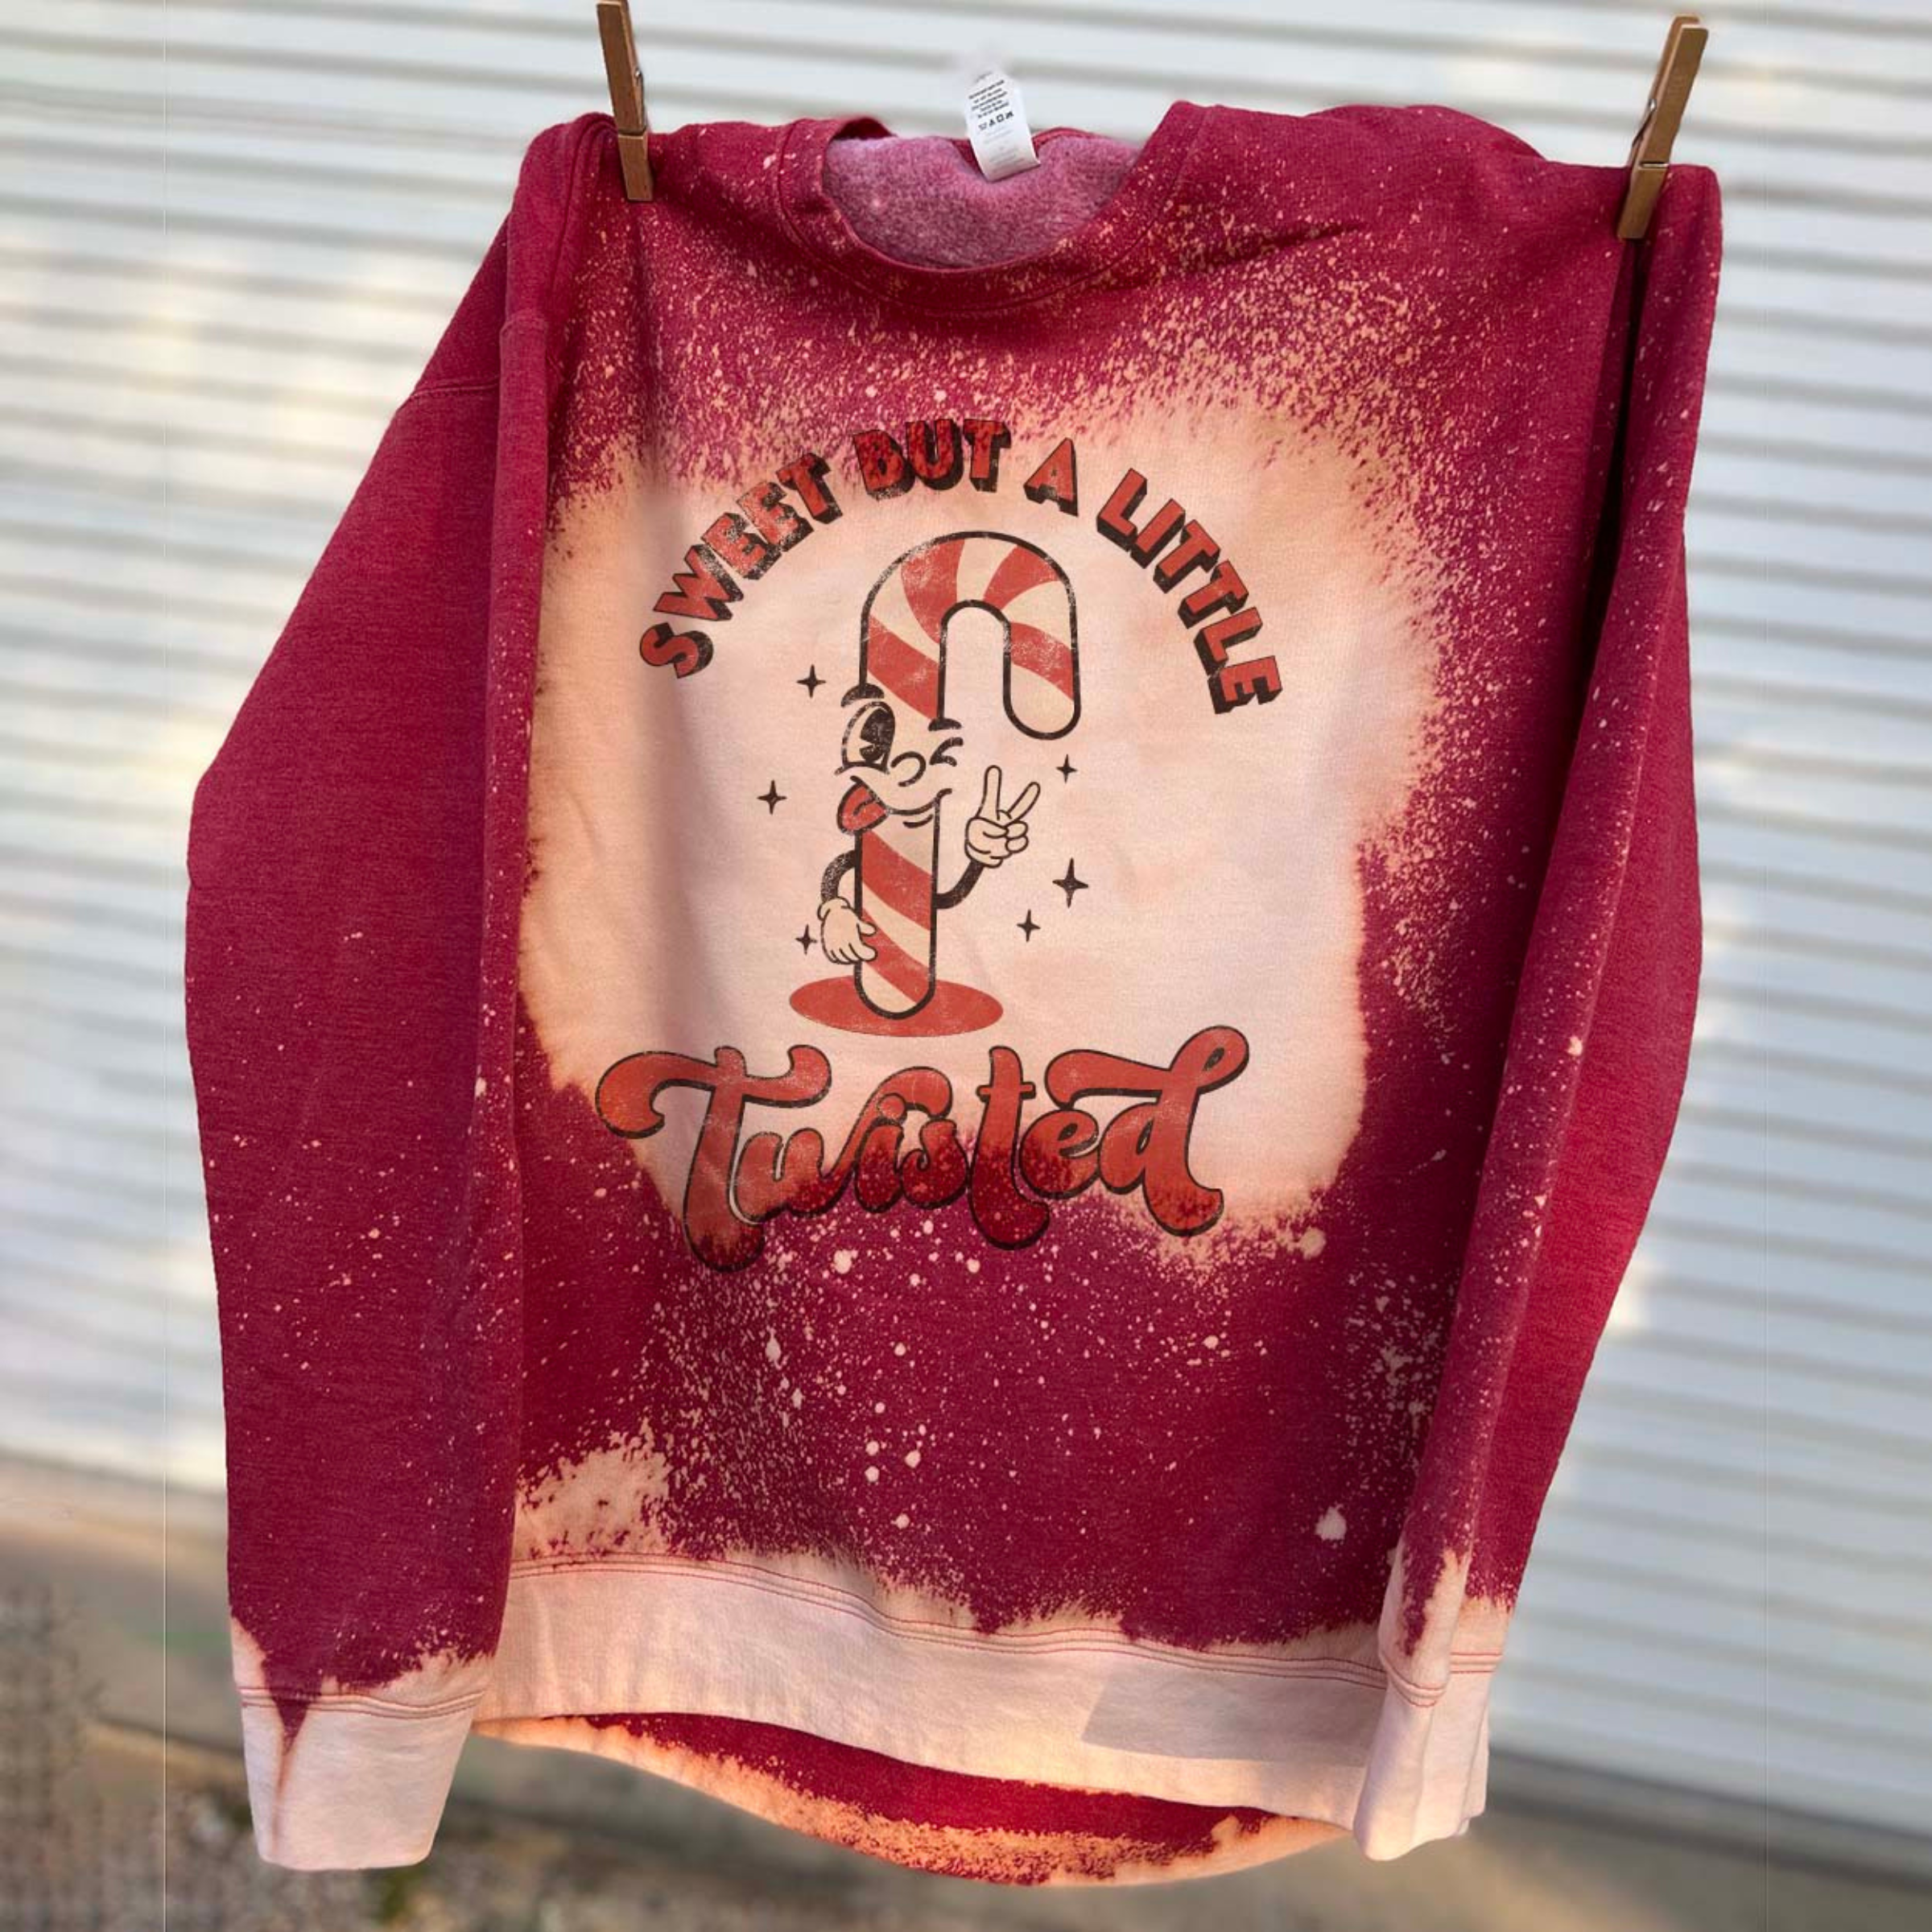 This bleached splatter graphic sweatshirt in red includes a crew neckline, long sleeves, and a graphic that says "Sweet But A Little Twisted" in a mix of cute, red fonts with a candy cane throwing up the peace sign. It is pictured here hung from a line.